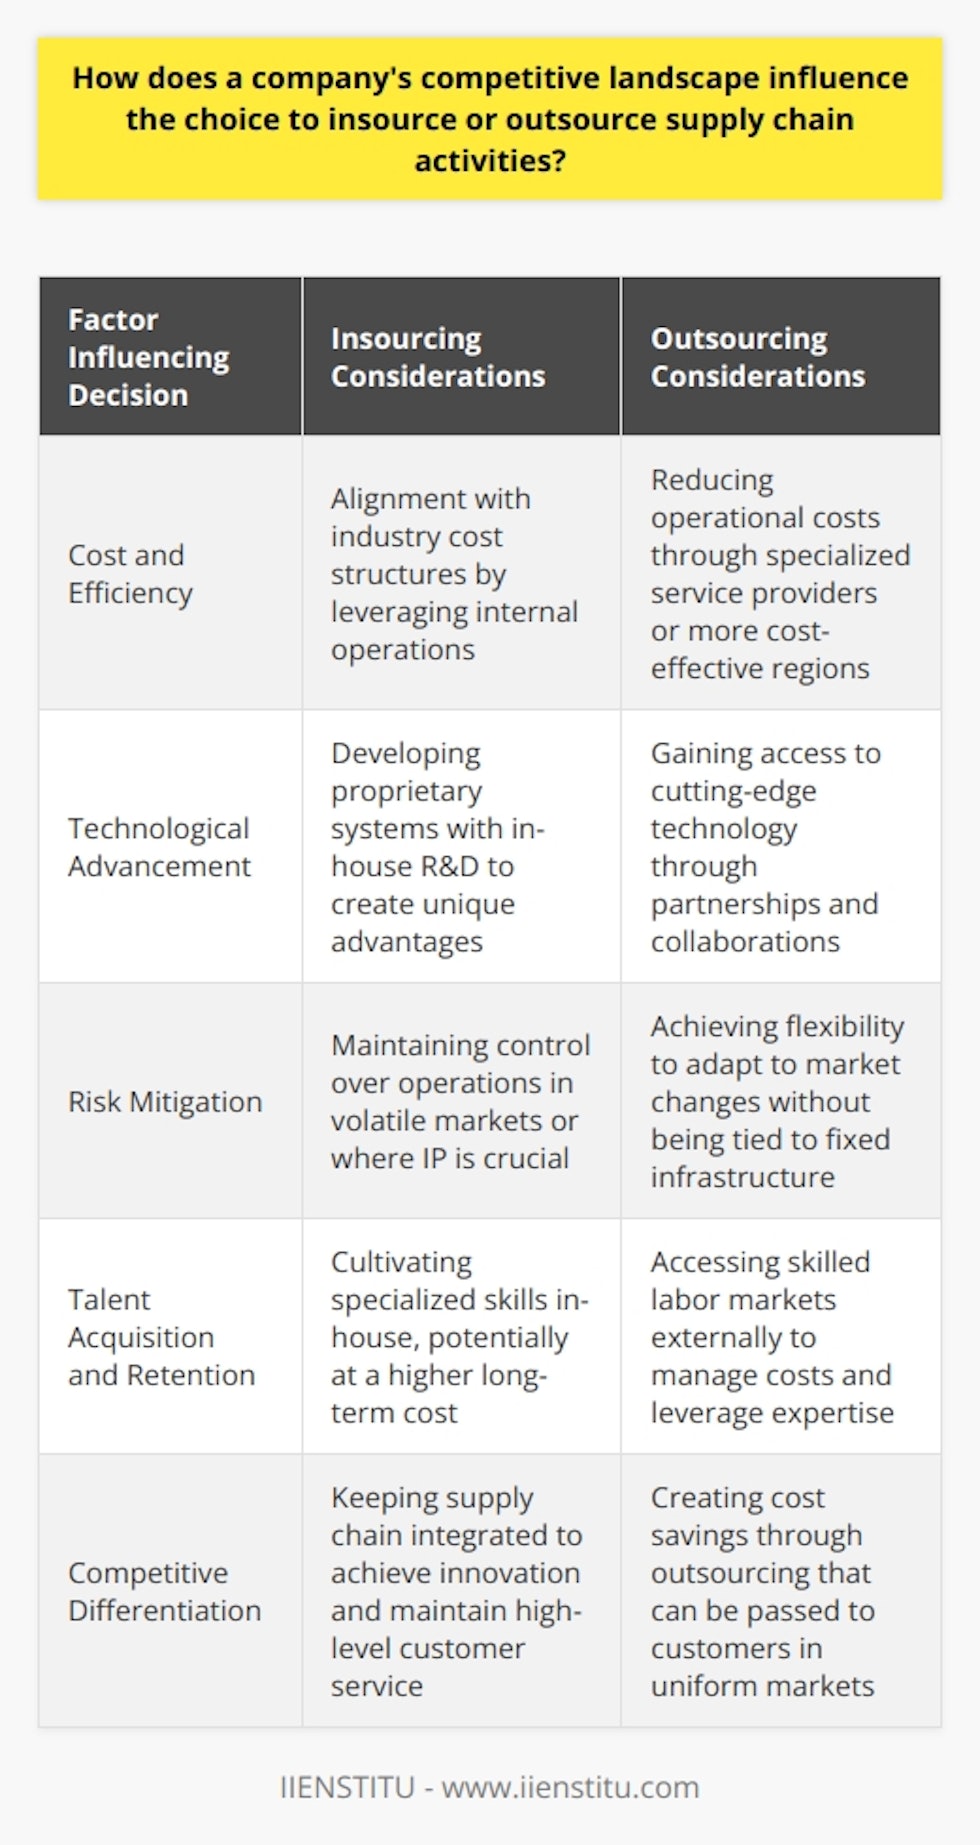 The competitive landscape in which a company operates plays a critical role in formulating strategies for supply chain management. These choices between insourcing and outsourcing supply chain activities are not made in isolation but are heavily influenced by the actions, capabilities, and positions of competitors.One of the primary considerations in this decision-making process is cost and efficiency. Businesses continually observe their competitors to ensure operational cost structures remain viable. A competitor's move to outsource logistics, manufacturing, or customer service to more cost-effective regions or specialized service providers can profoundly change the cost dynamics within an industry. If a company finds itself at a competitive disadvantage due to higher operational costs, it may be compelled to outsource certain activities to align its cost structure with industry norms.Furthermore, access to and implementation of cutting-edge technology can be a driving factor in the choice to insource or outsource. Companies that operate in rapidly evolving technological landscapes need to make strategic decisions regarding where to invest their resources. If competitors are incorporating advanced technologies and achieving a market edge through outsourcing relationships, businesses may follow suit to harness these innovations. On the other hand, a company having a robust R&D department may insource these capabilities to build proprietary systems, thereby establishing a unique competitive advantage.Risk mitigation is another significant factor influenced by the competitive landscape. For industries where the market is volatile or where intellectual property is a cornerstone of competitive advantage, companies may choose to insource to maintain greater control over their operations. However, industries characterized by fast-paced change may encourage companies to outsource, providing them with the flexibility to swiftly adjust to new trends without being encumbered by fixed infrastructure or long-term commitments.Talent acquisition and retention is yet another area impacted by the competitive landscape. The choice to insource supply chain activities often comes with the requirement for specialized skills and knowledge that can be hard to find and expensive to cultivate. If a company observes that its competitors are gaining traction by leveraging skilled labor markets through outsourcing, it might consider similar pathways to access expertise and manage labor costs effectively.In industries where the competitive landscape is marked by a high degree of uniformity in product offerings, companies may choose to outsource supply chain functions to create cost savings that can be passed on to customers. However, in industries where differentiation is achieved through innovation, customer service, and rapid delivery, companies may opt to keep such functions in-house to maintain a higher level of control and integration.Ultimately, companies must perform a deep analysis of their competitive landscapes to ascertain the finest balance between insourcing and outsourcing supply chain activities. This strategic choice depends on an intricate understanding of cost structures, technological progress, market risks, and the availability of skilled labor. It is an ongoing, dynamic process that requires attentiveness to the external competitive environment as well as introspection into the company's internal capabilities and strategic objectives.